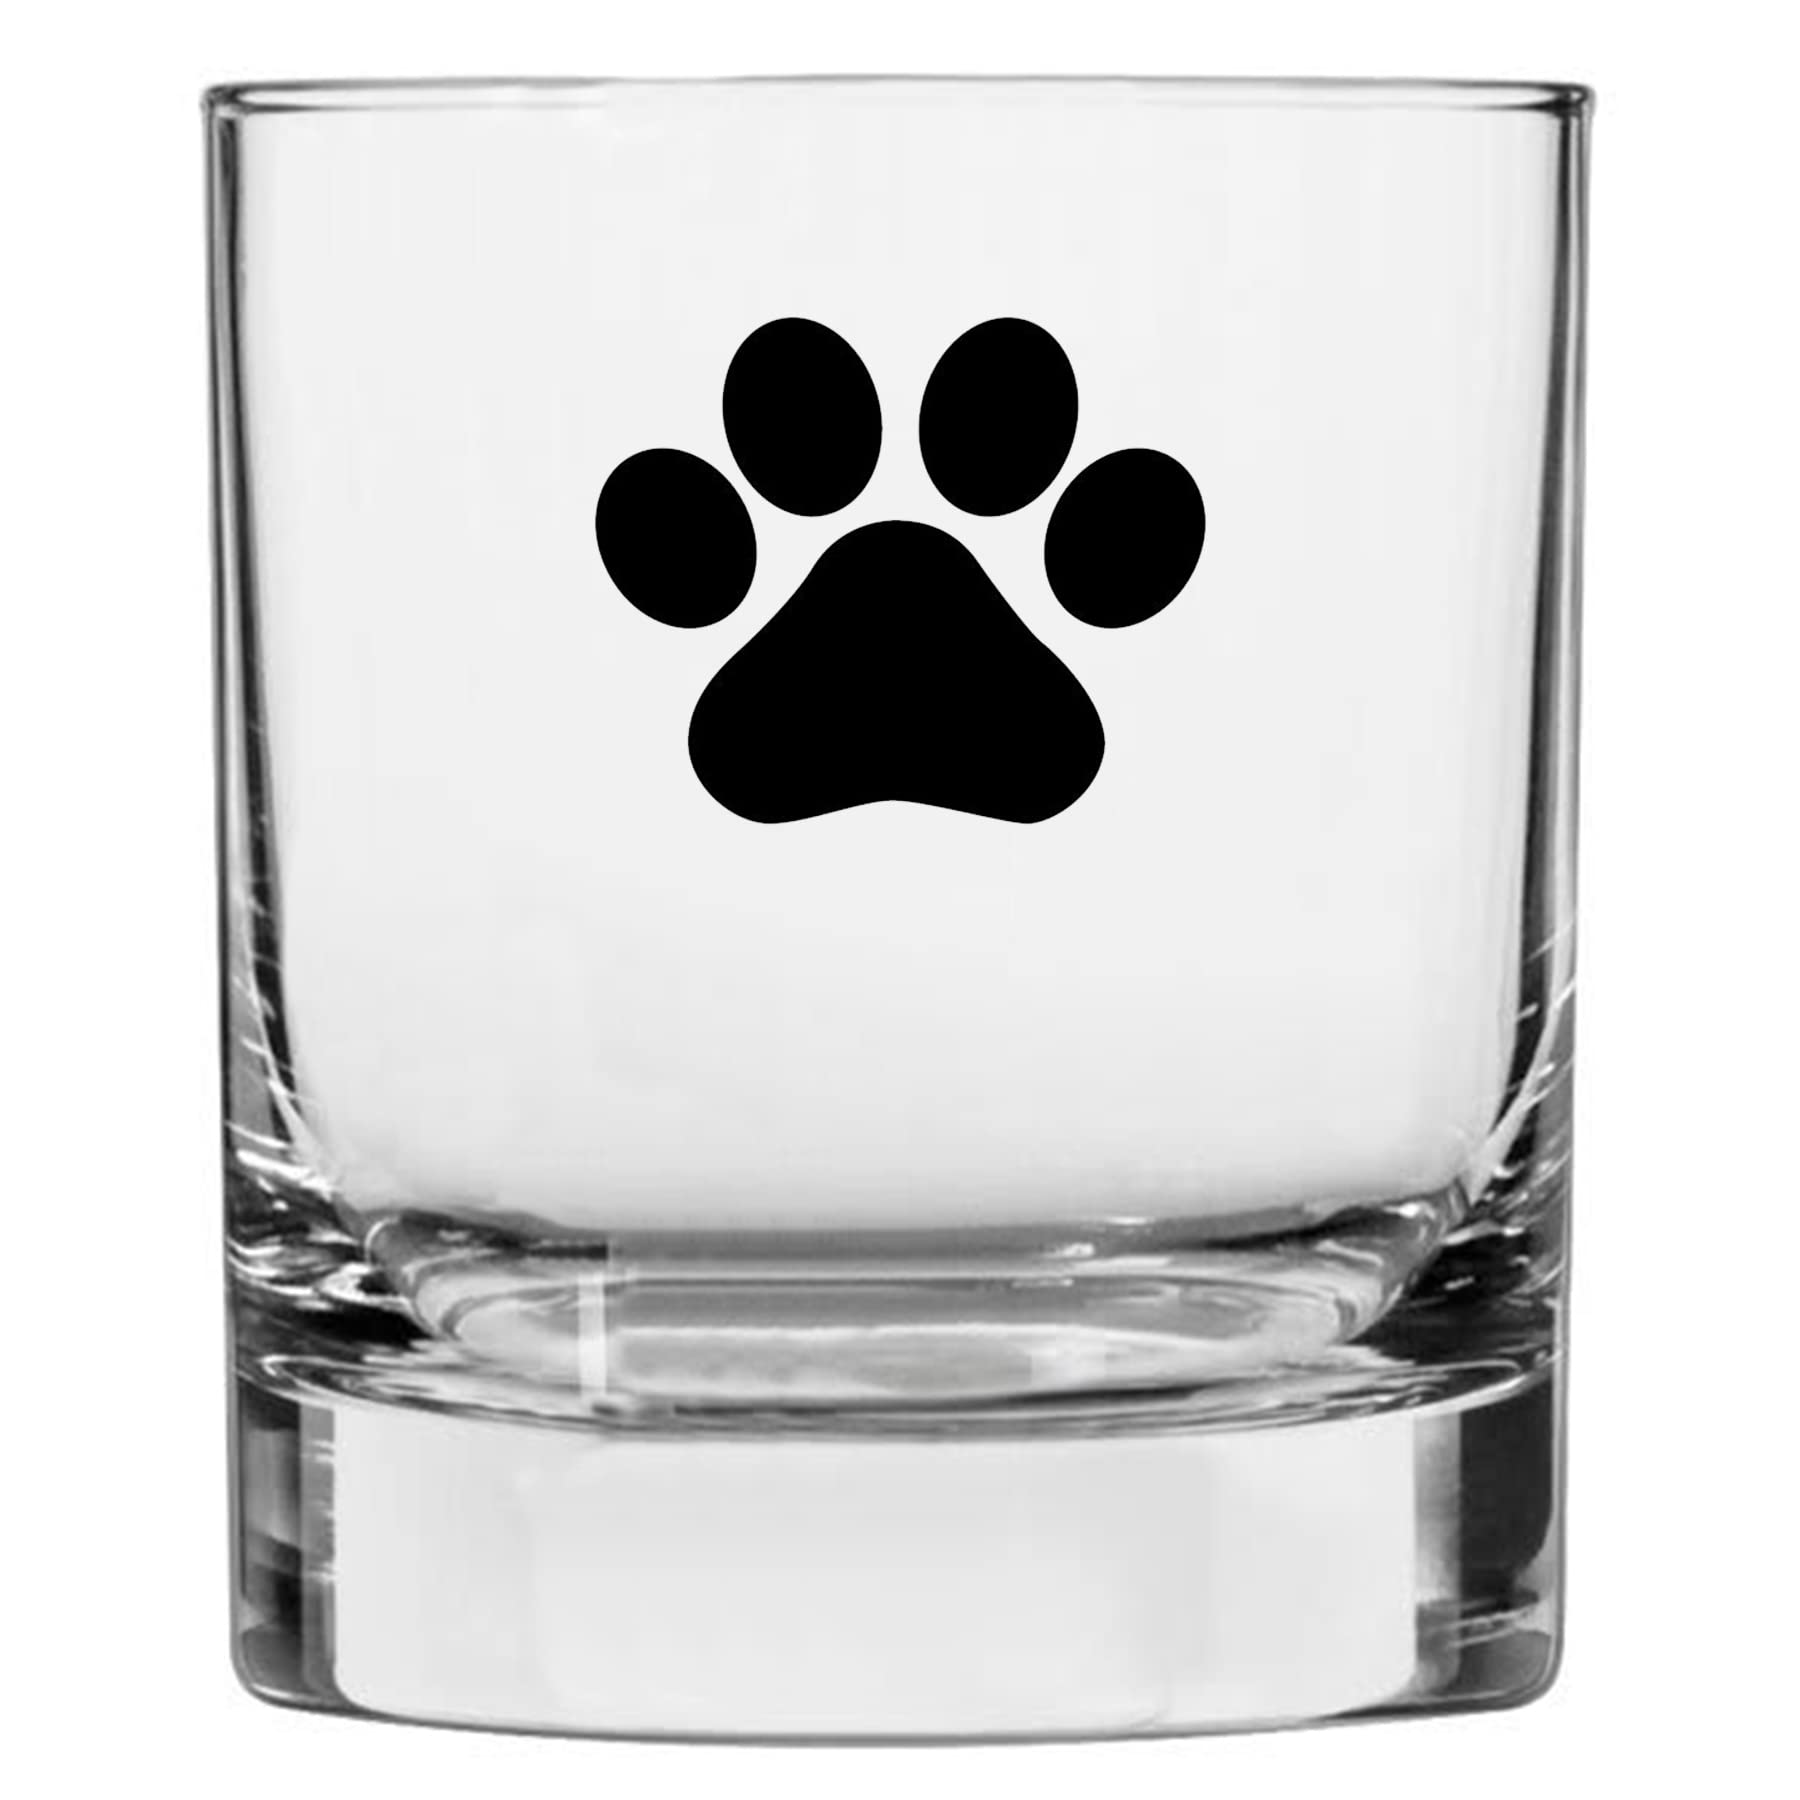 Spotted Dog Company Printed 11oz Whiskey Rocks Glass, I'm O.L.D, Only Likes Dogs, Paw Print, CM01